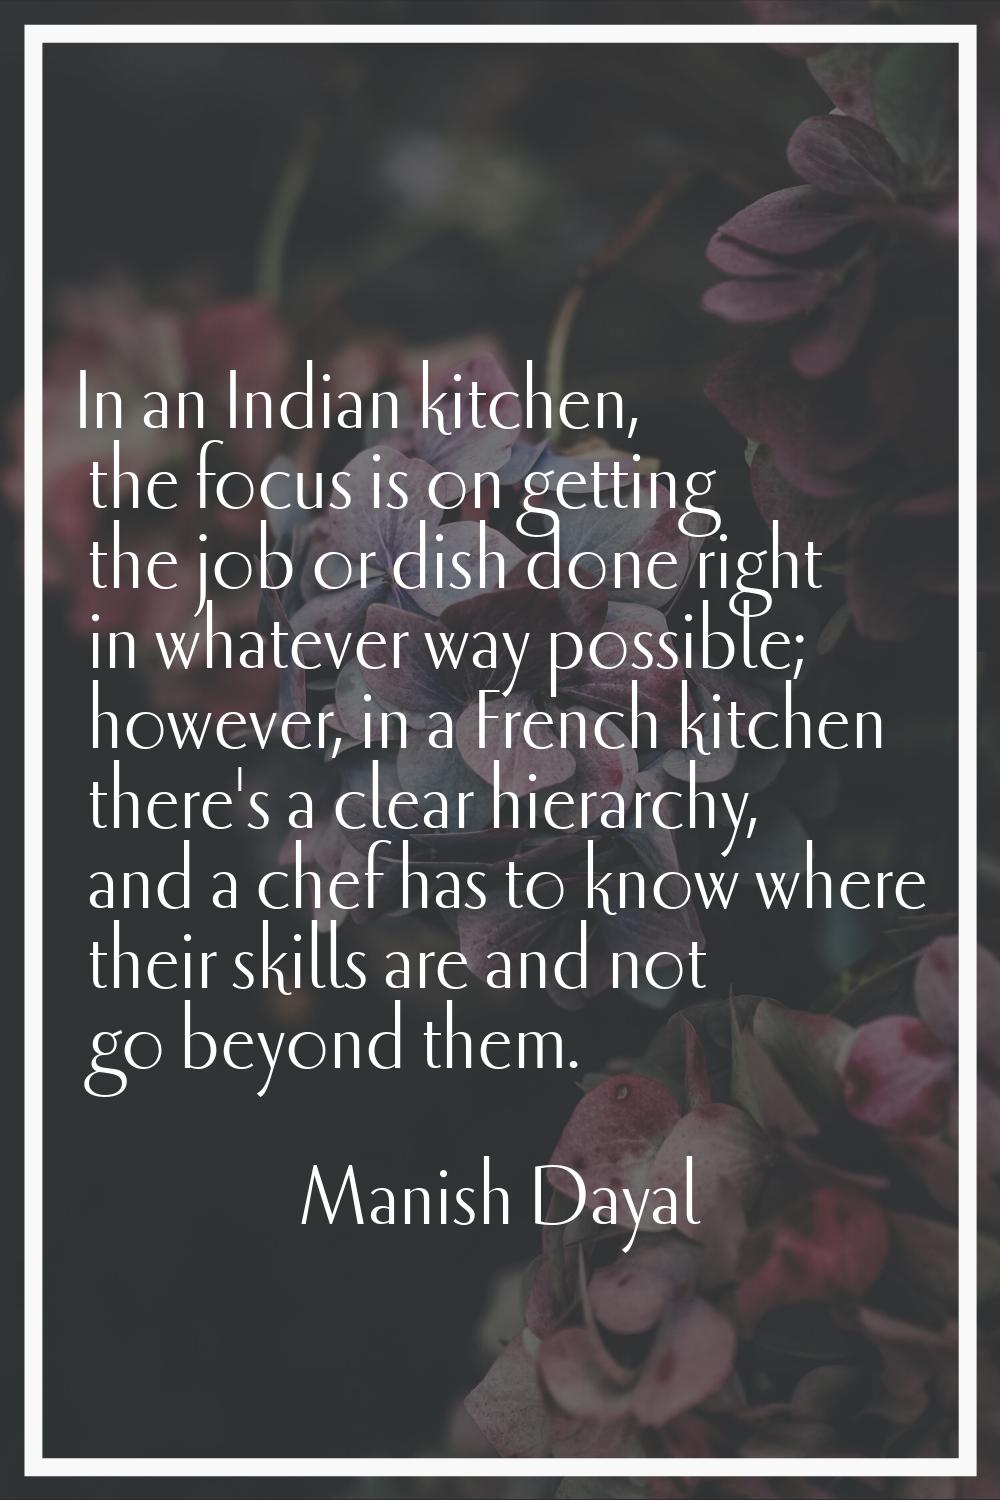 In an Indian kitchen, the focus is on getting the job or dish done right in whatever way possible; 